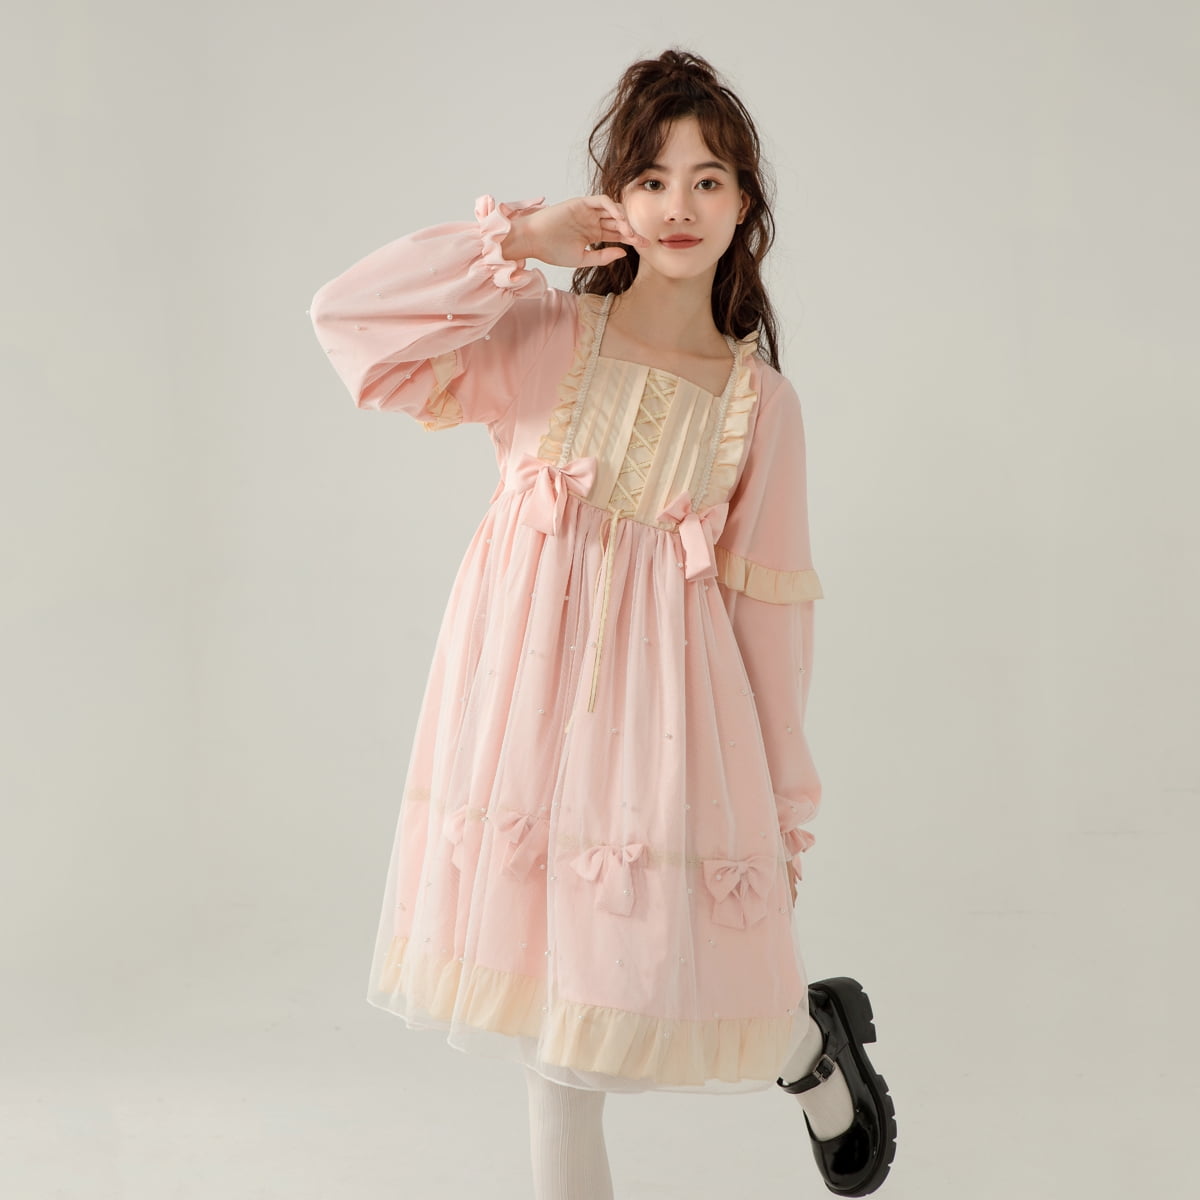 ZYZMH Lolita Dress Women Vintage Sleeveless Bow Princess Tea Party Dresses  Girls Chic Print Lolita Dress (Color : White, Size : S Code) : :  Clothing, Shoes & Accessories